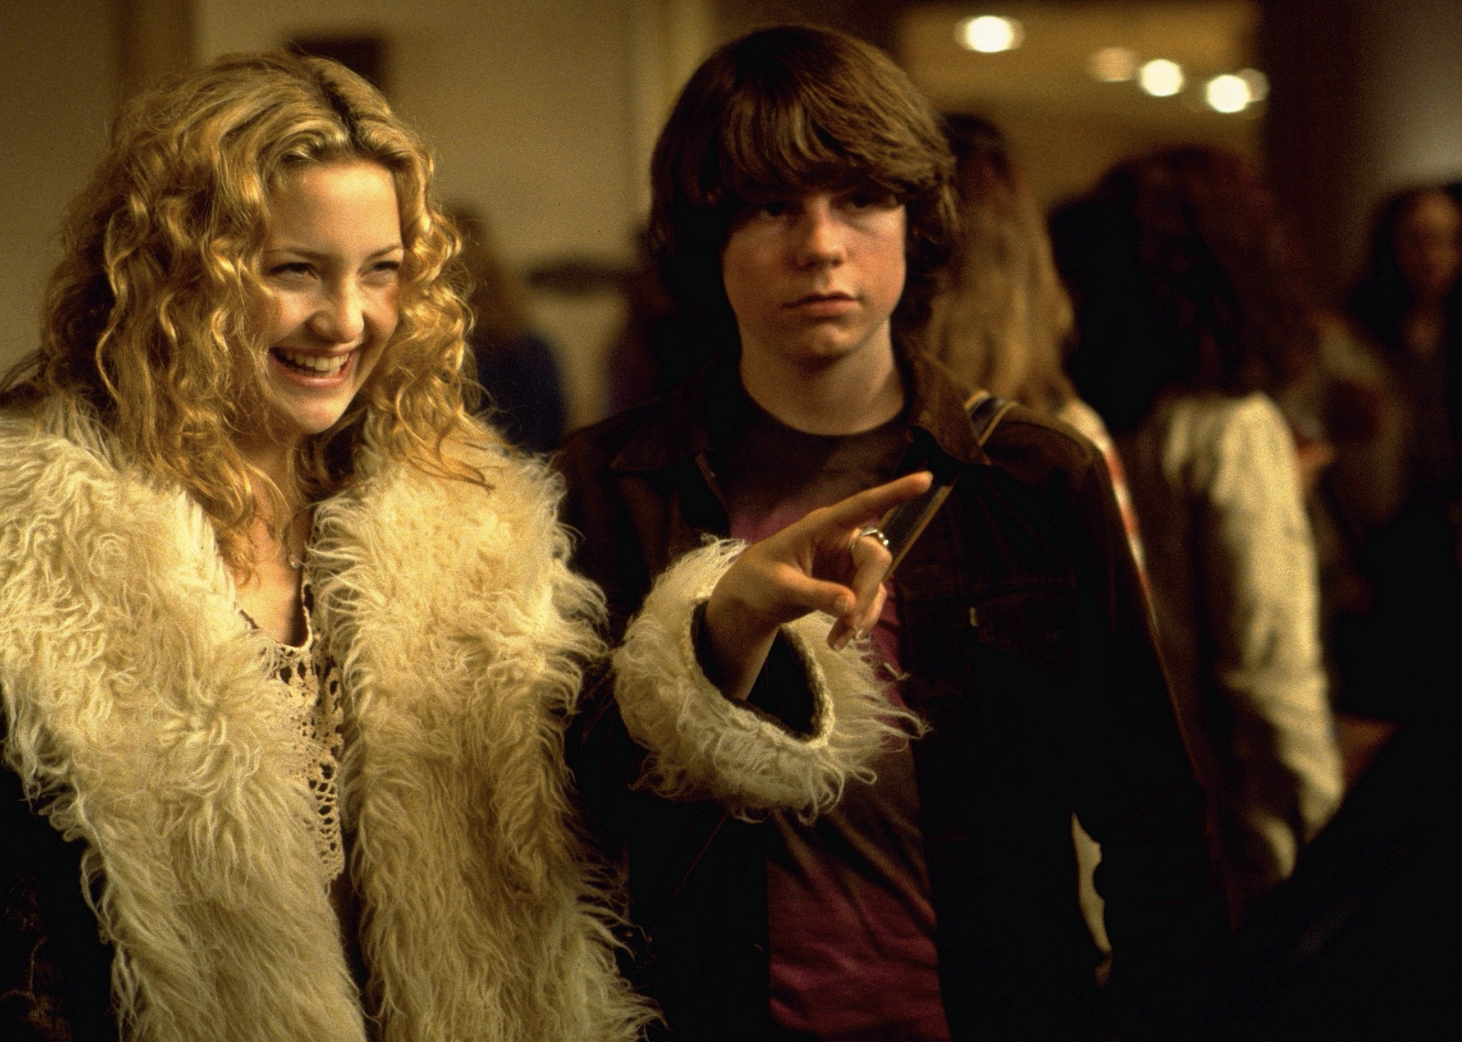 Kate Hudson and Patrick Fugit in 'Almost Famous'